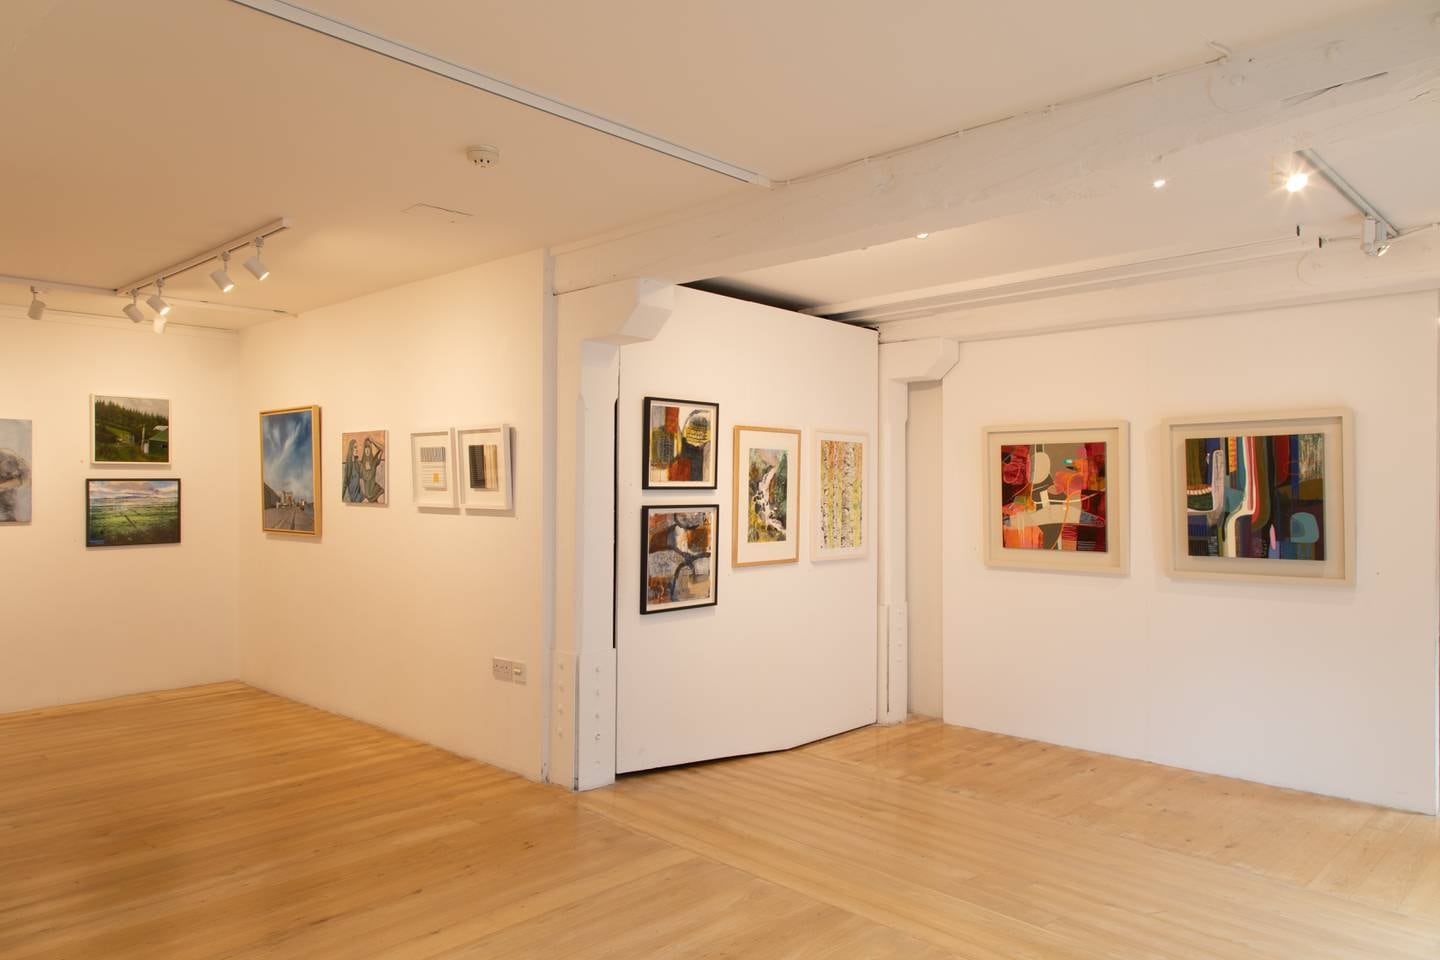 Lavit Gallery’s Annual Members Exhibition